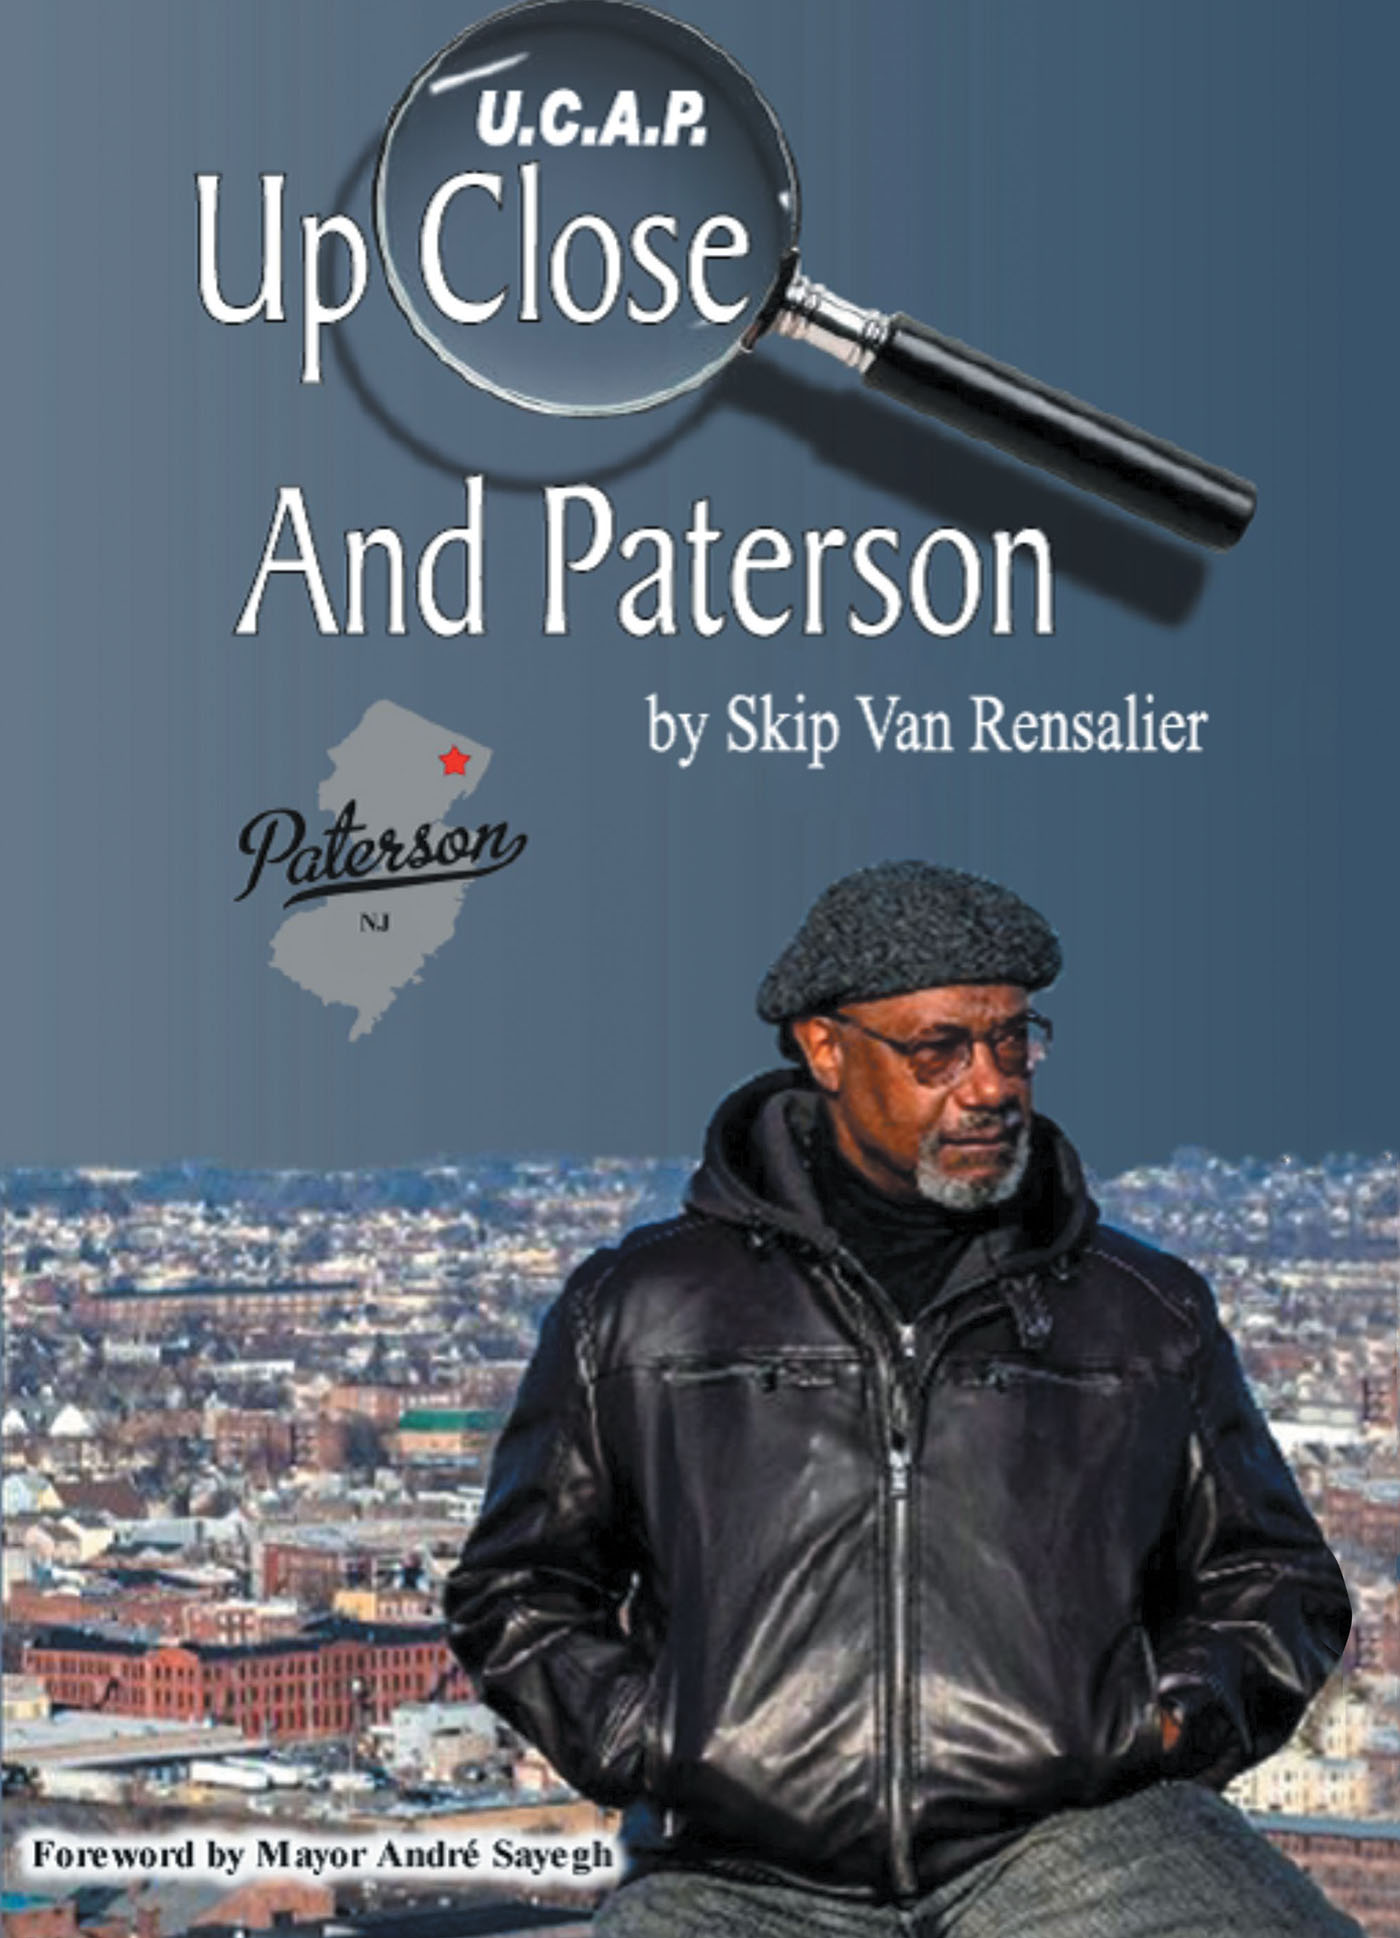 Author Skip Van Rensalier’s New Book, “U.C.A.P.: Up Close and Paterson,” is a Beautiful Love Letter to the City of Paterson, Told by the Author and Other Fellow Citizens